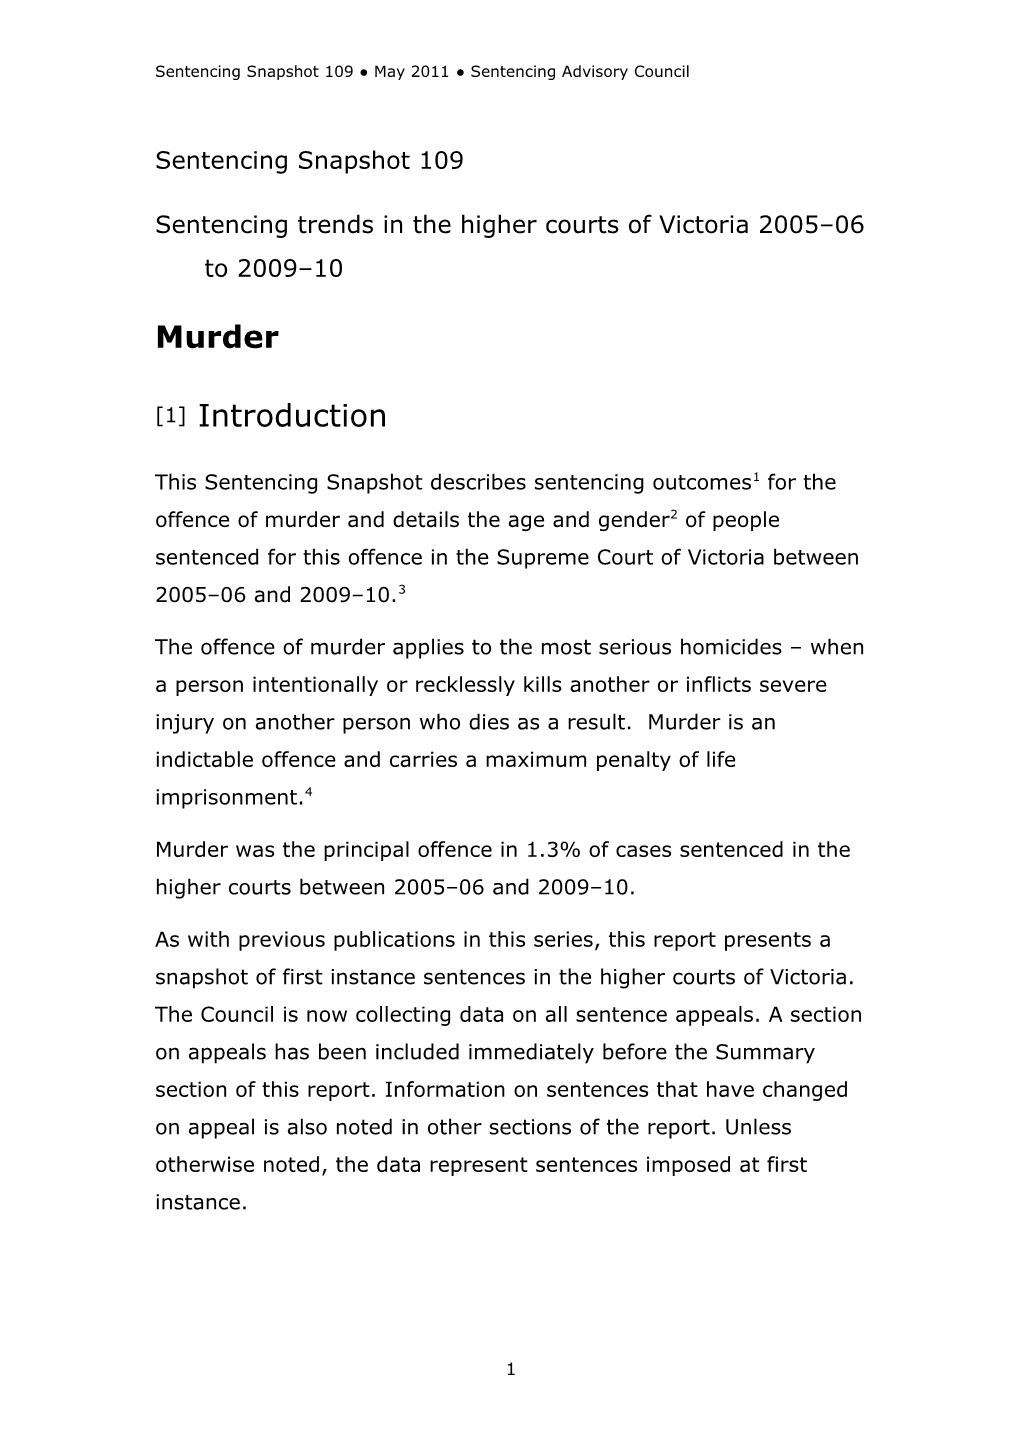 Sentencing Trends for Murder in the Higher Courts of Victoria 2005 06 to 2009 10